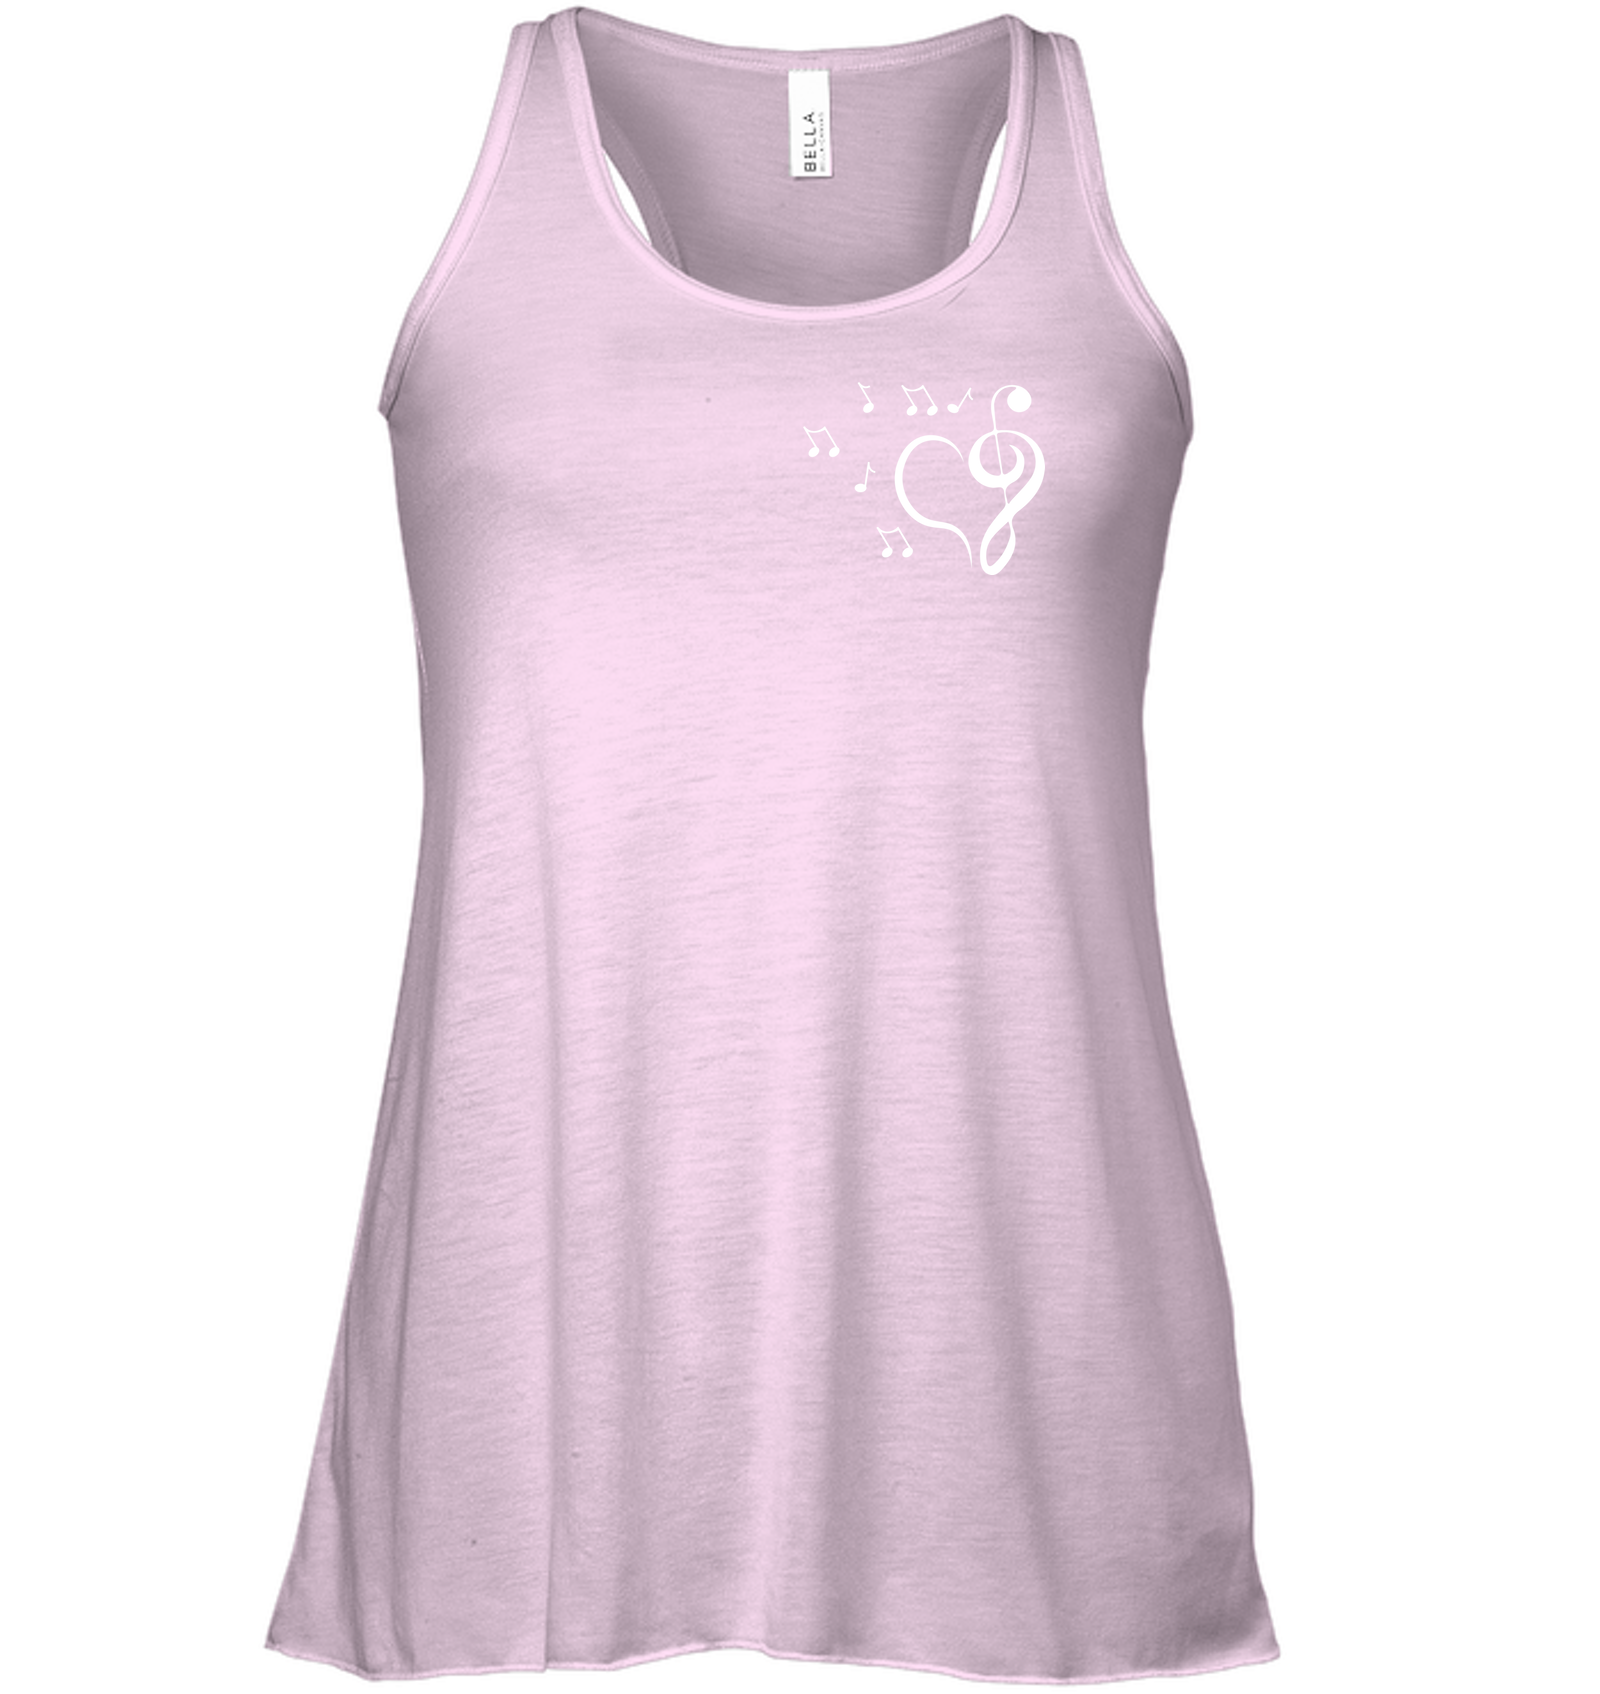 Musical heart with floating notes (Pocket Size) - Bella + Canvas Women's Flowy Racerback Tank